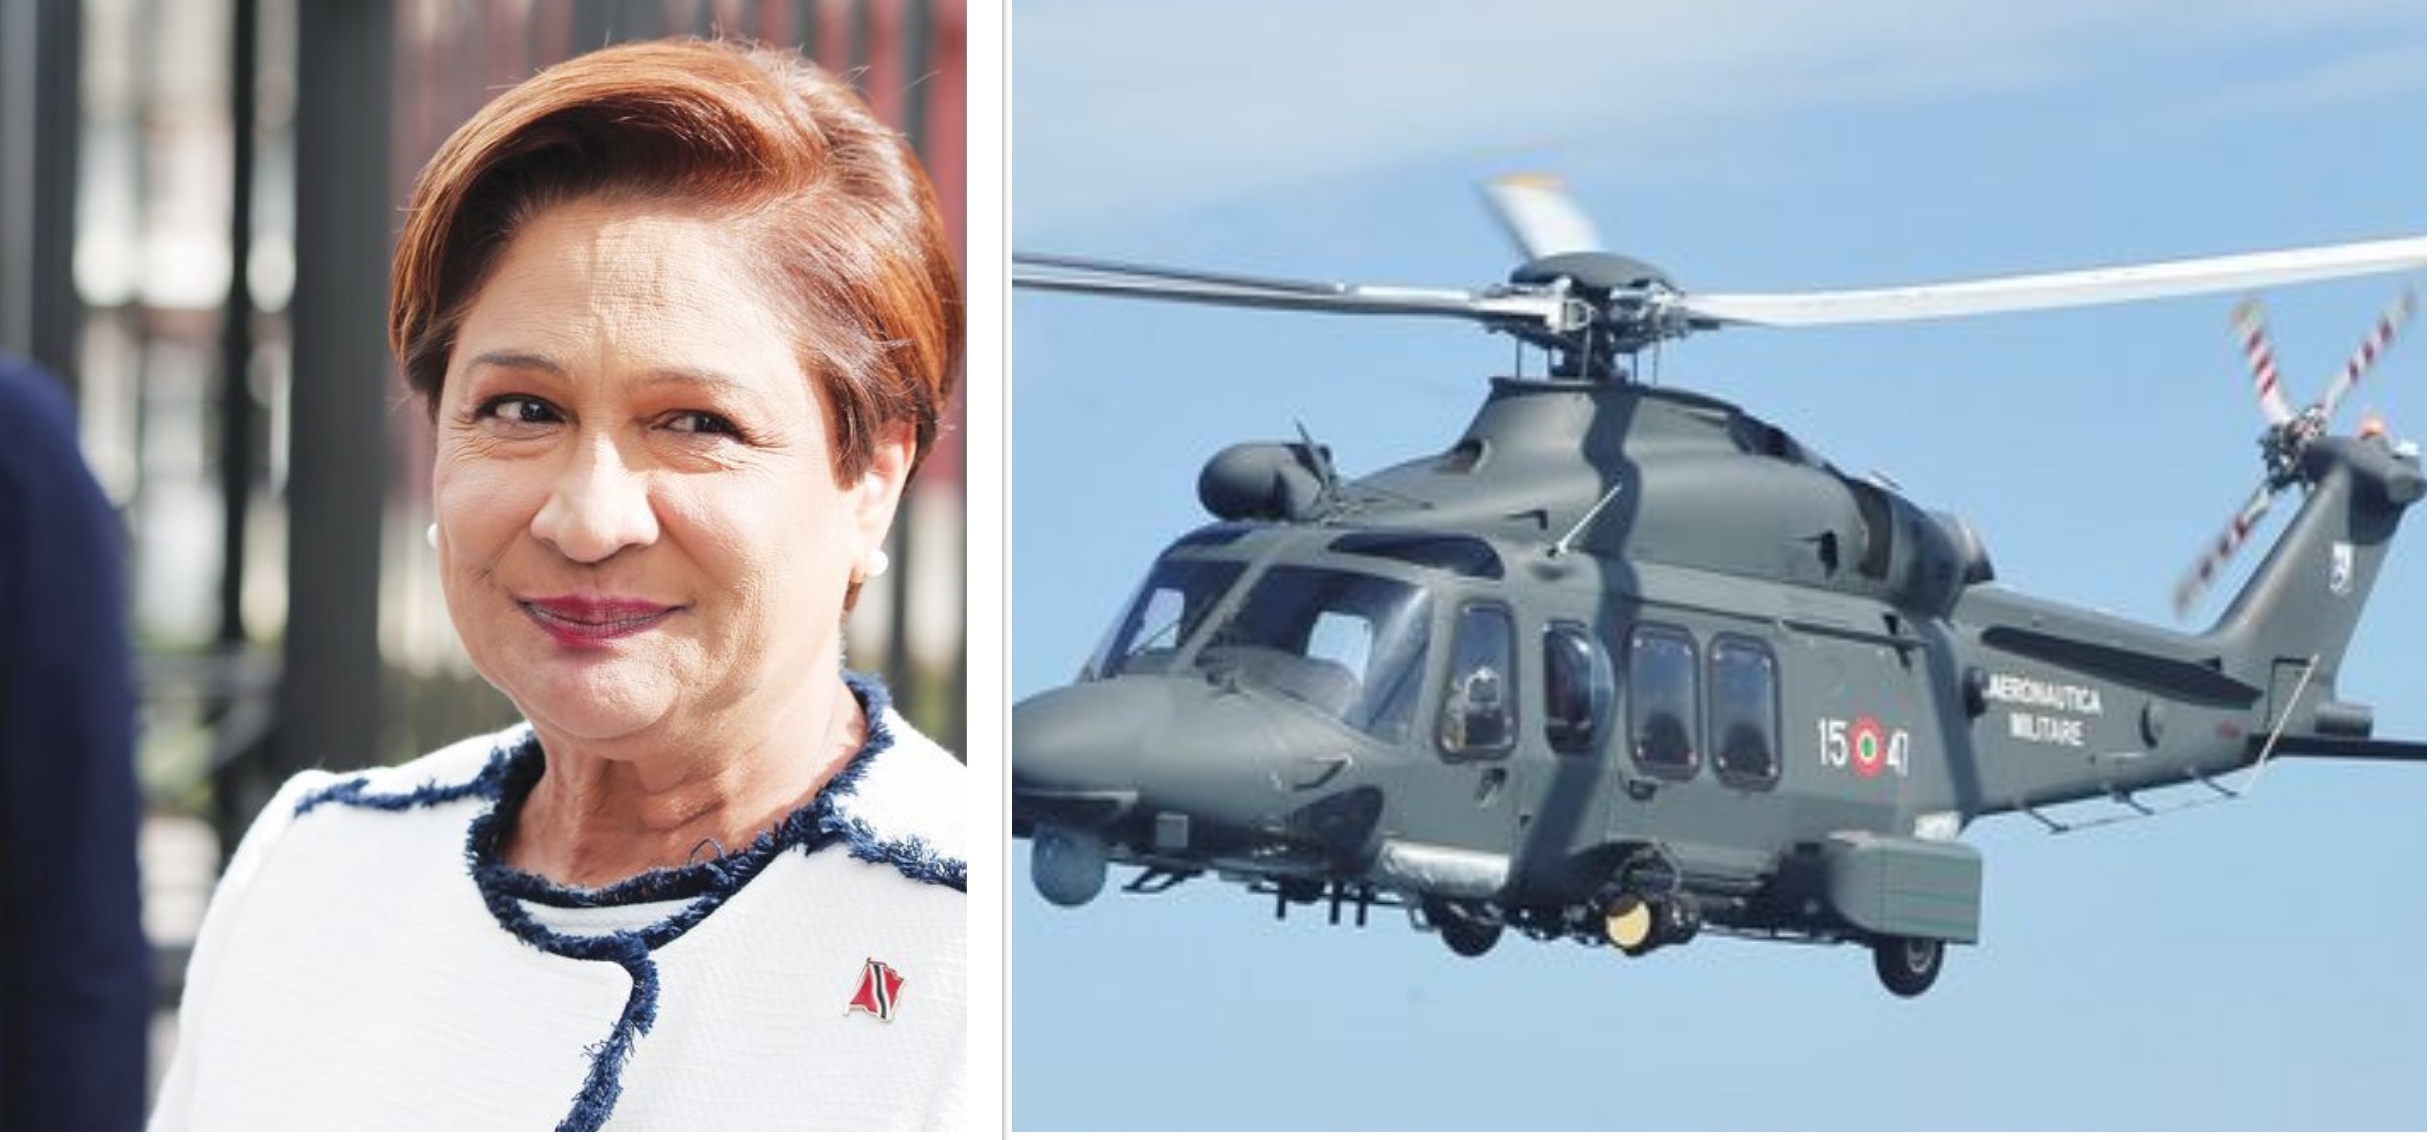 Kamla’s breach of helicopter contract could soon cost the State US$13M